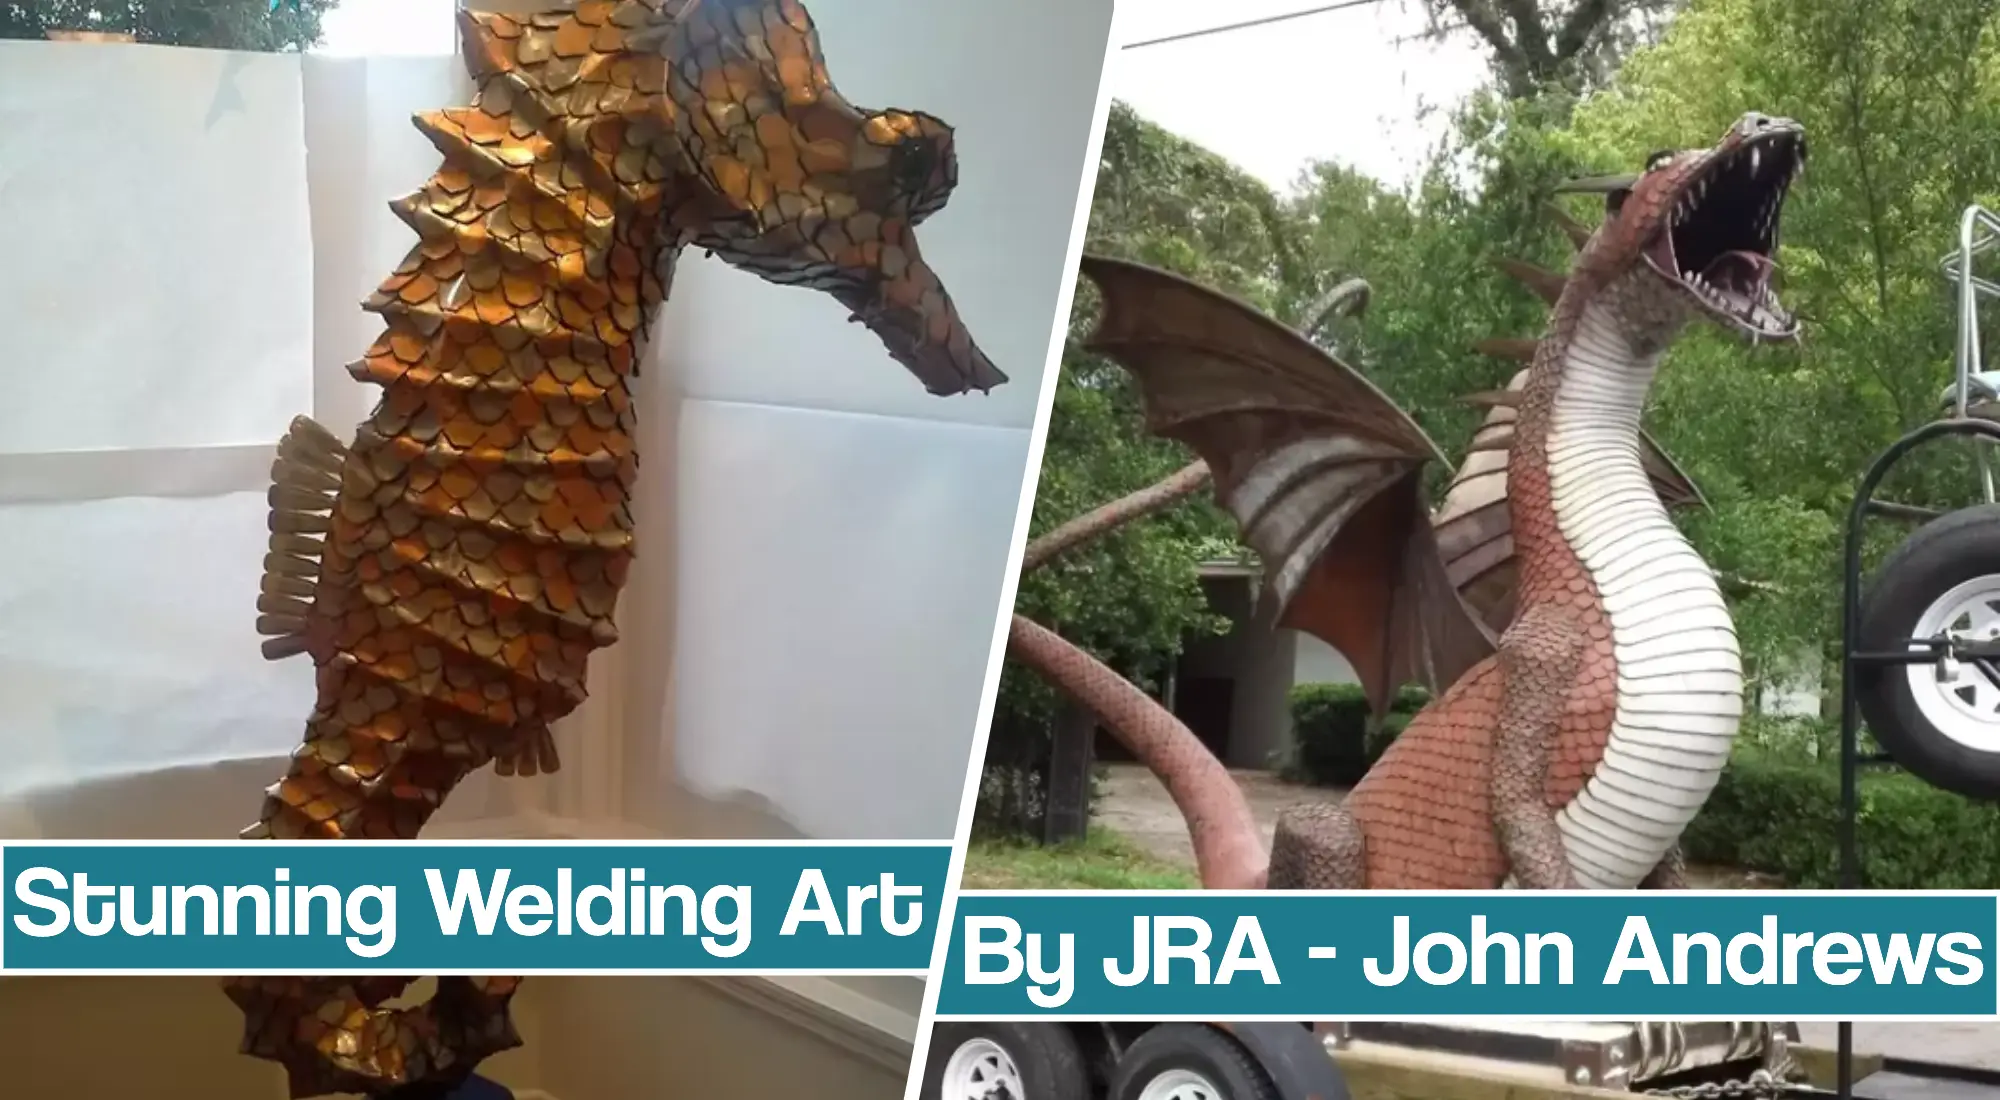 Featured image for the JRA Welding Art article